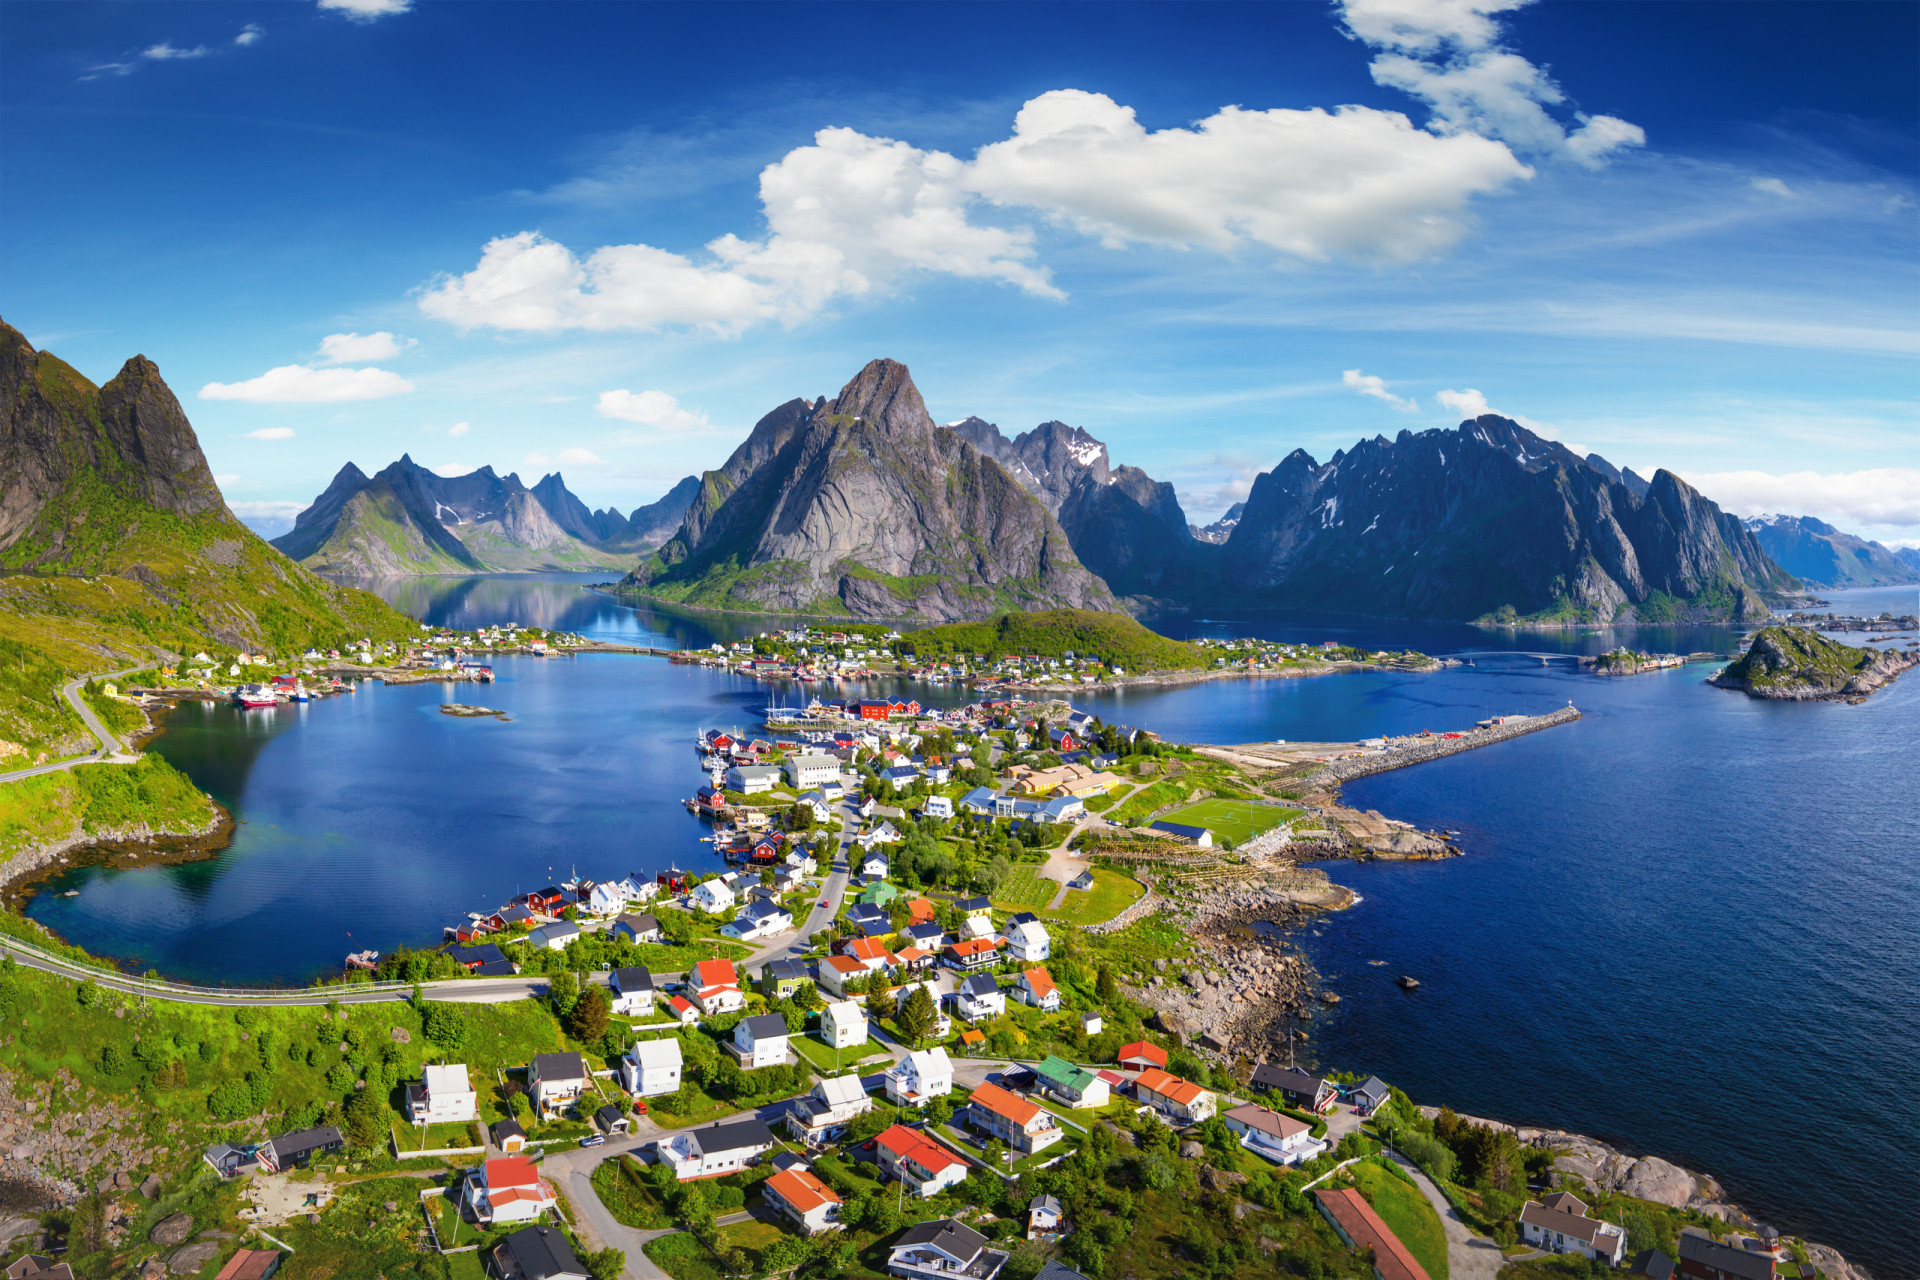 <p>Similarly, coastal Norway unveils itself in spectacular fashion when viewed from the deck of a cruise ship. And for landlubbers, there's an enviable choice of luxury hotels to check into serving cities like Oslo, Kristiansand, and Bergen.</p><p>You may also like:<a href="https://www.starsinsider.com/n/472742?utm_source=msn.com&utm_medium=display&utm_campaign=referral_description&utm_content=636762en-en"> International secret societies you didn't know existed</a></p>